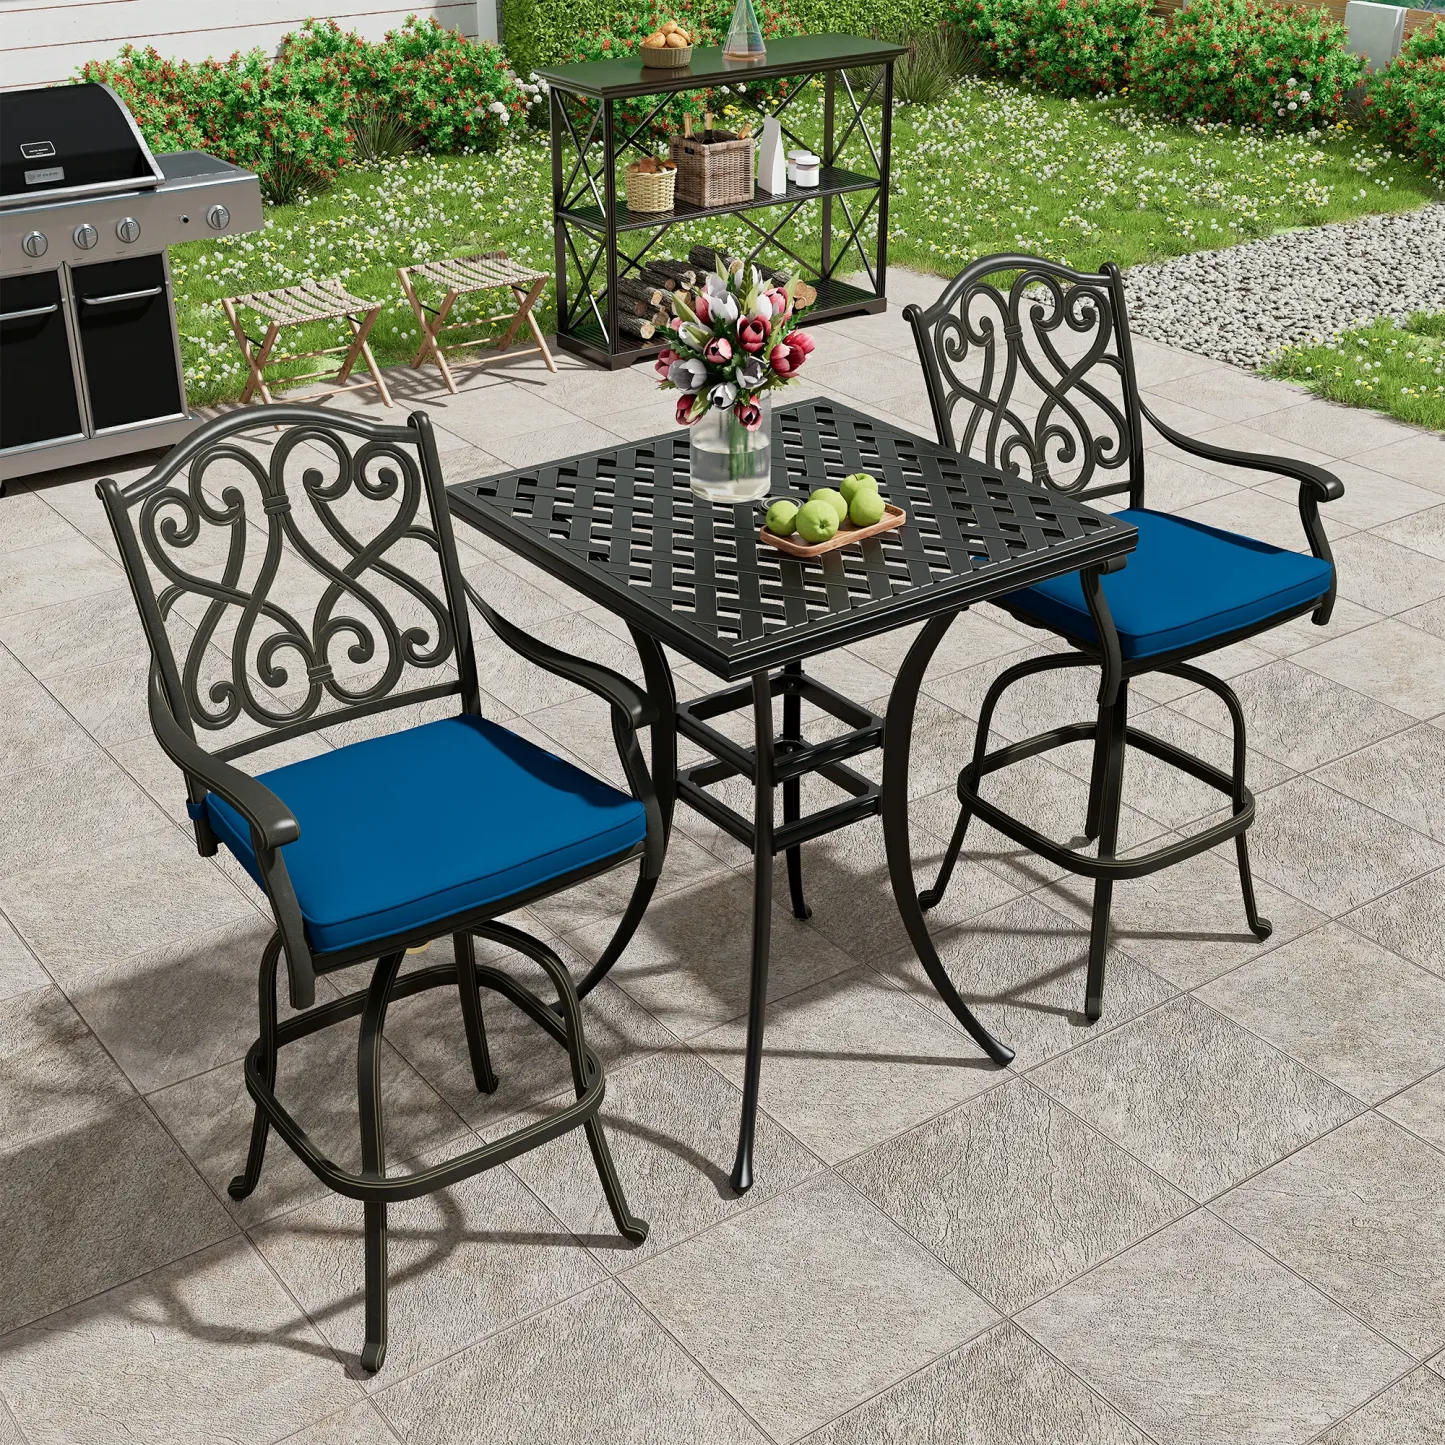 3-Piece Patio Bistro Set Cast Aluminum 2 High Bar Swivel Chairs with Cushion and 1 Square Table